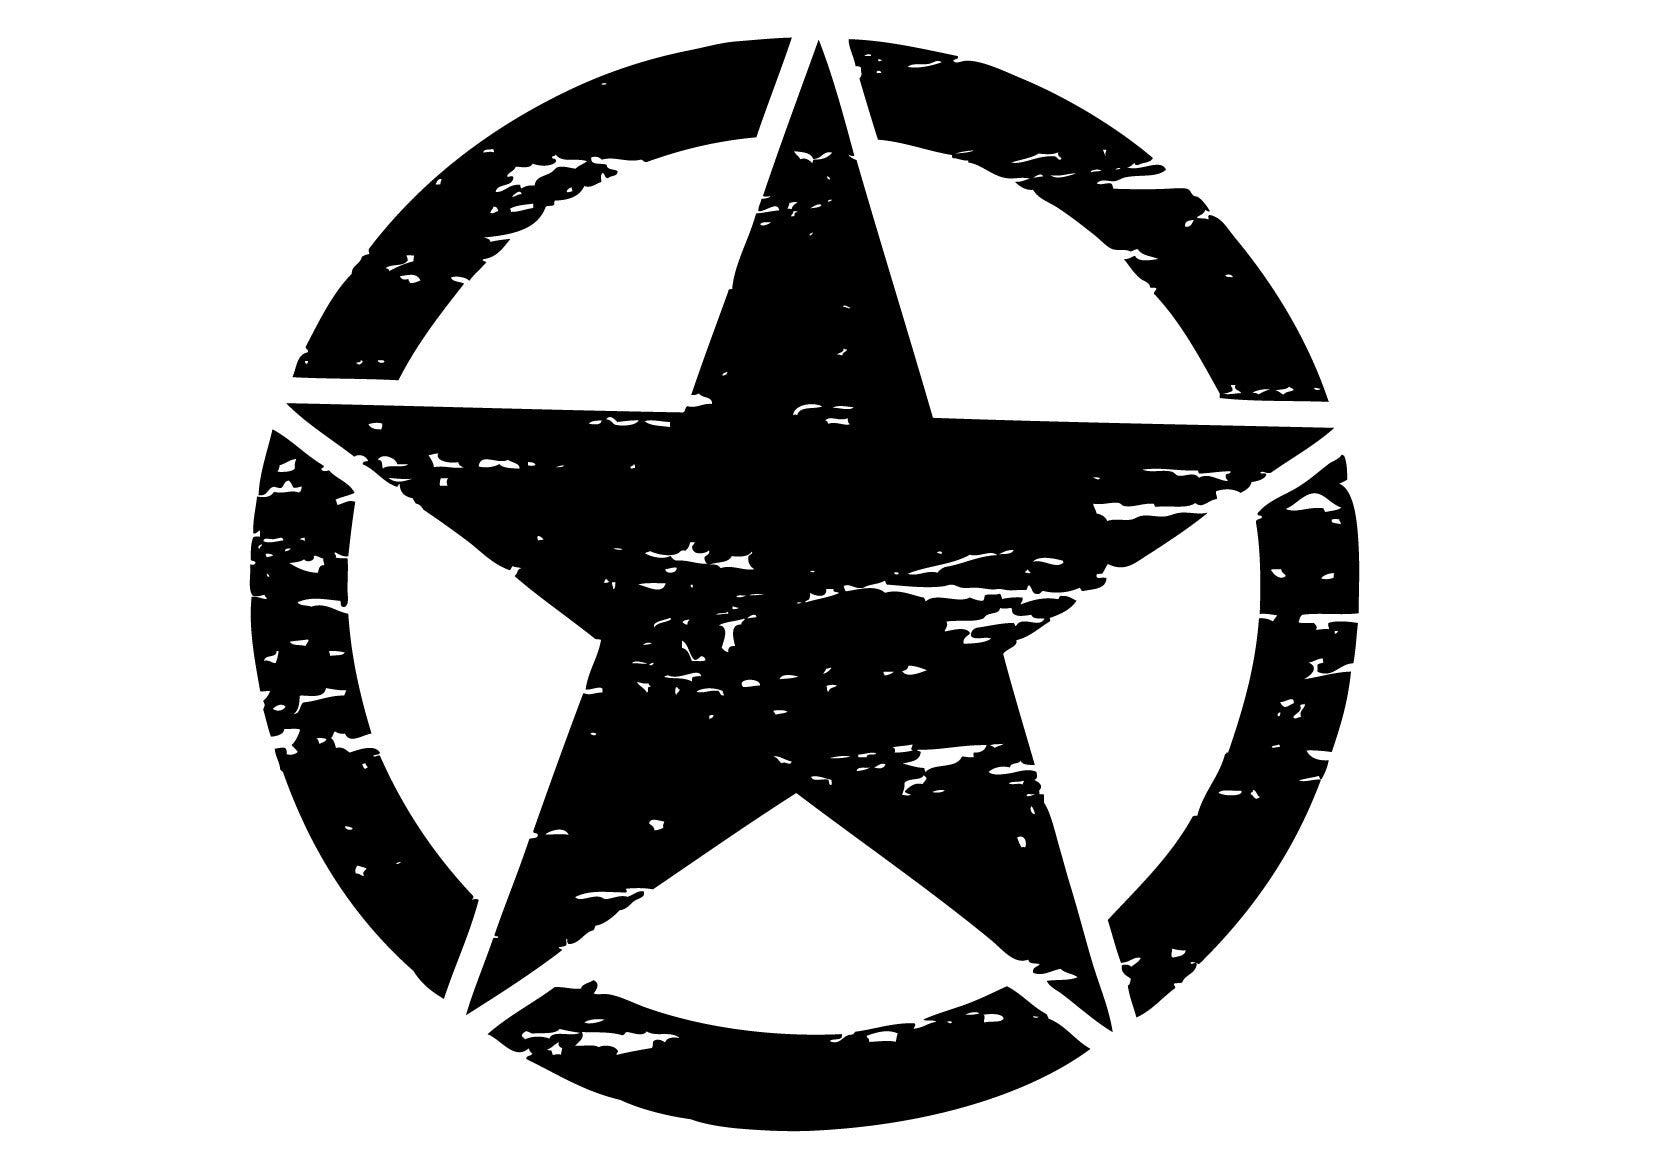 13" Reflective Oscar Mike Freedom Distressed Star Hood Graphics Decal